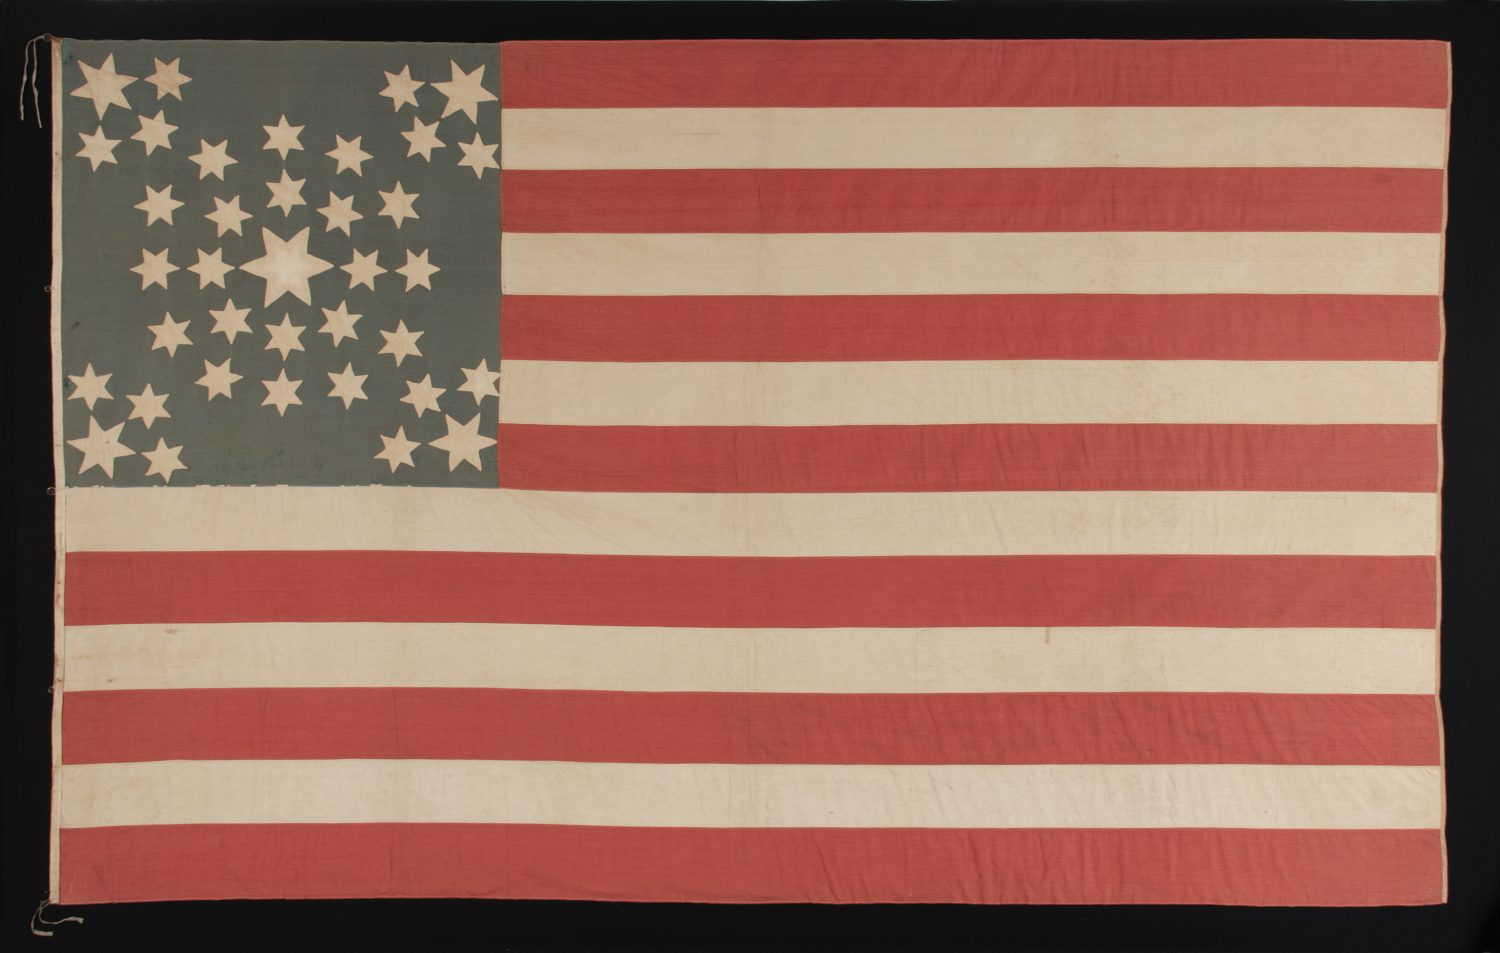 A MASTERPIECE AMONG KNOWN EXAMPLES: AMAZINGLY GRAPHIC FLAG WITH 37 SIX-POINTED STARS IN A SPECTACULAR DOUBLE-WREATH STYLE MEDALLION, POSSIBLY WITH A PRO-UNION MESSAGE, INSCRIBED WITH THE INTIALS "A.P." AND THE NAME "PURSEL." NEBRASKA STATEHOOD, 1867-1876